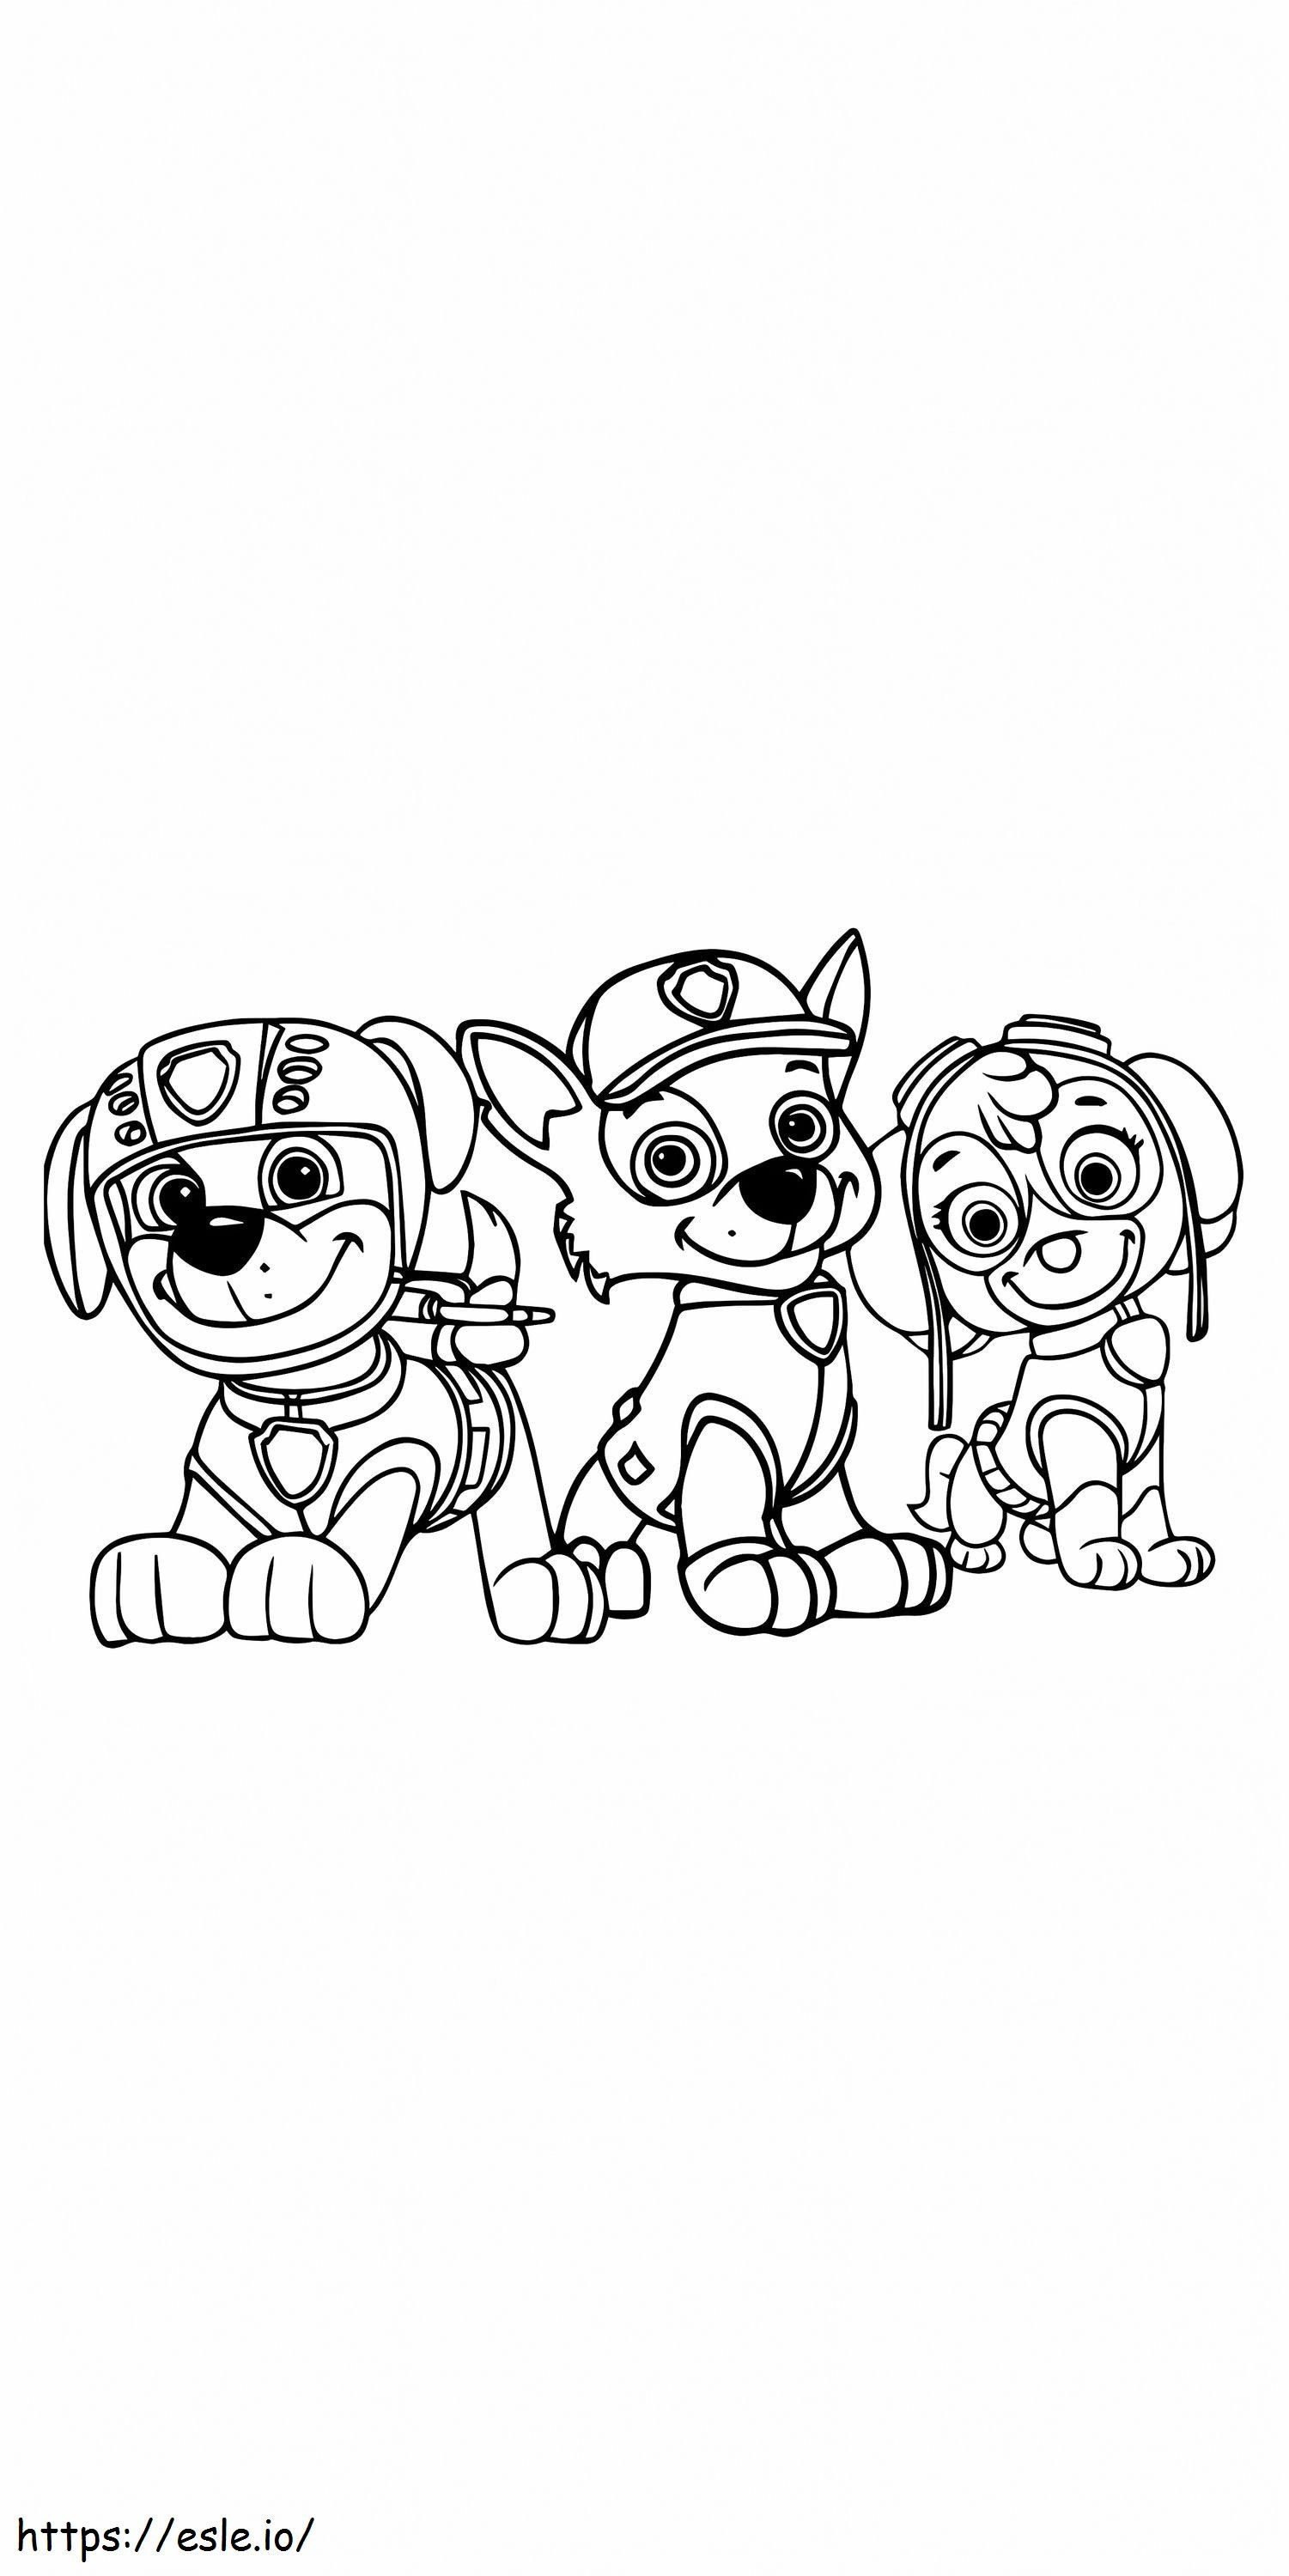 Paw Patrol Dino Rescue coloring page